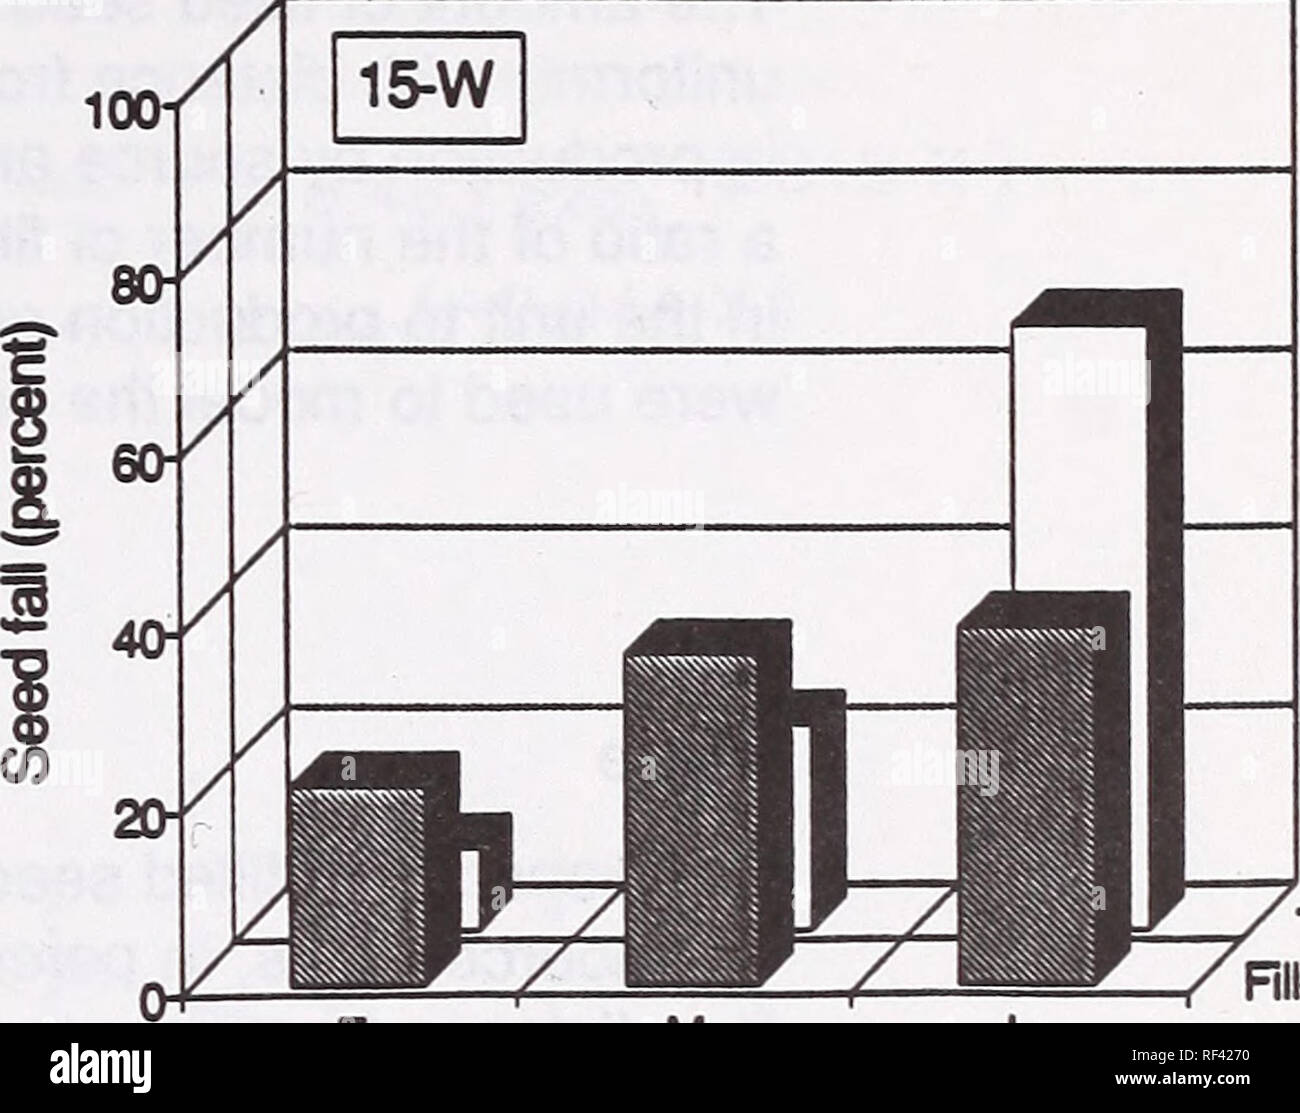 . Dispersal of white spruce seed on Willow Island in interior Alaska. White spruce Propagation; White spruce Alaska. E M L Season of dispersal Total (852) Riled (369). E M L Season of dispersal Total (648) Filed (121) Figure 2 (continued) Table 4—Mean number of filled white spruce seed (and percentage of all seed) per square meter dispersed along transects in cleared openings, by seed source area, on Willow Island for 1987 Number of filled seed (and percentage of all seed) dispersed into openings by distance from source in meters Source area 10 20 30 40 50 60 76 91 122 1-N 30(41) 42(62) 12(50) Stock Photo